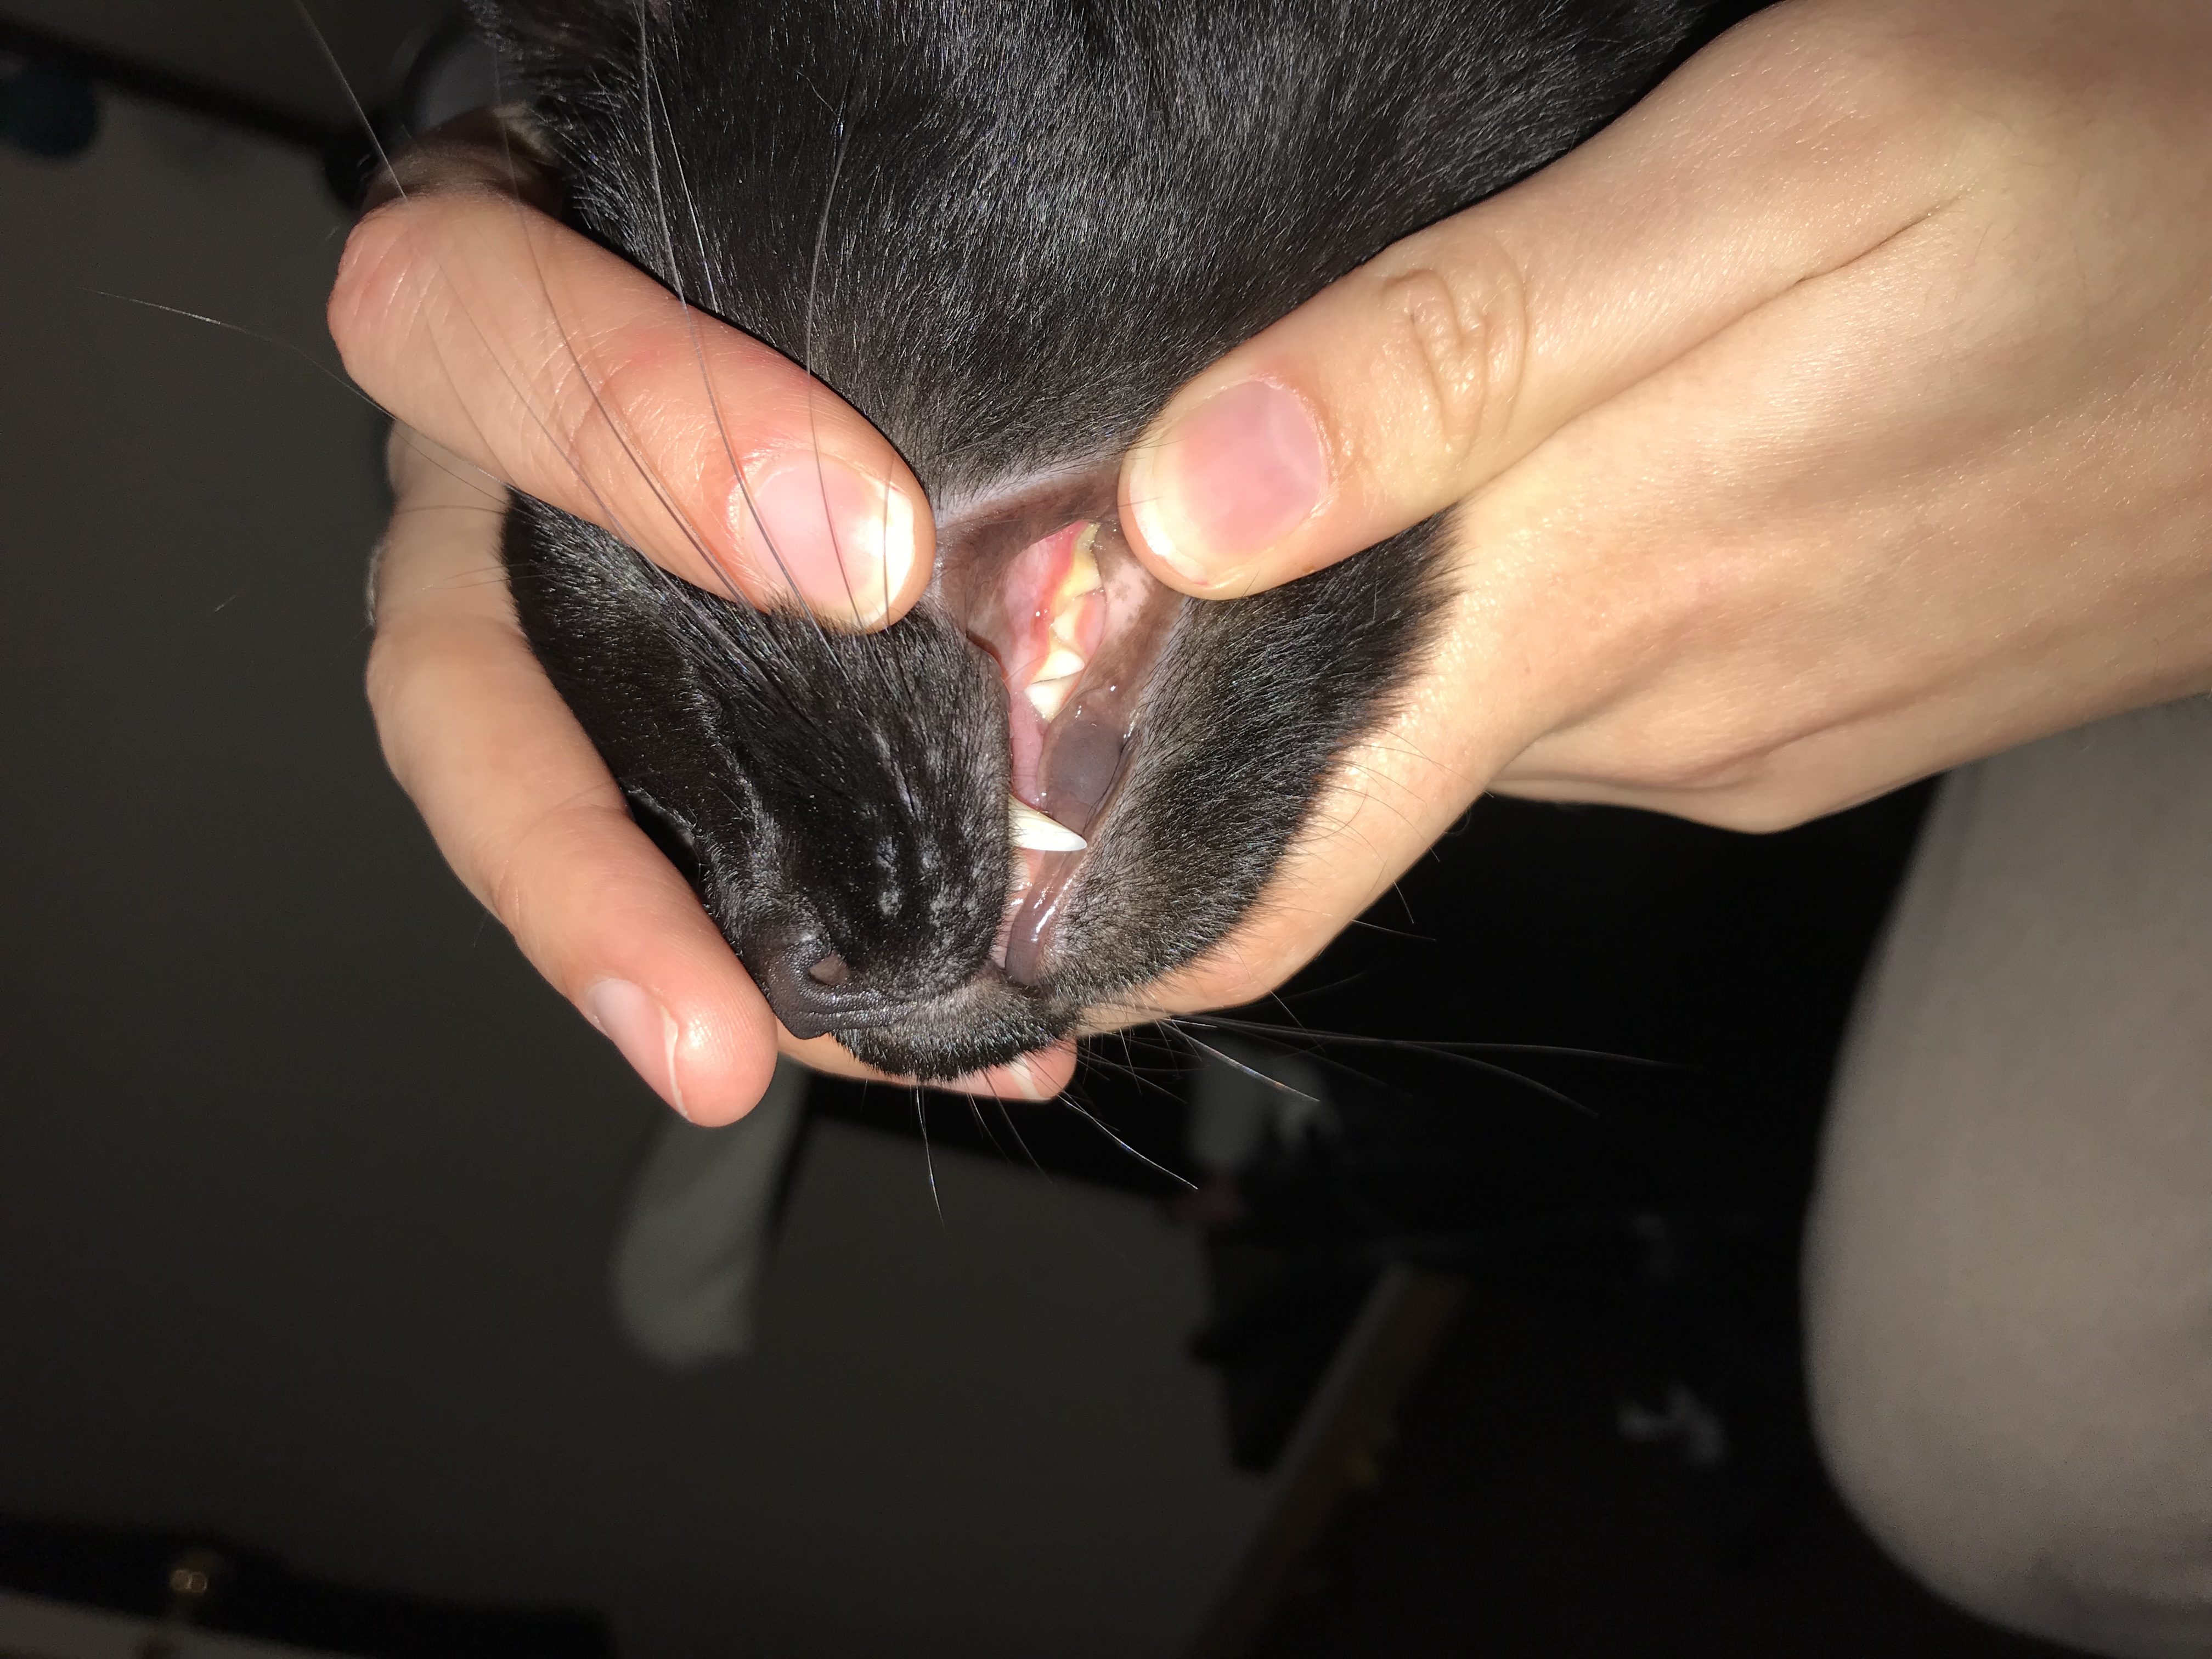 Inflamed Gums? TheCatSite